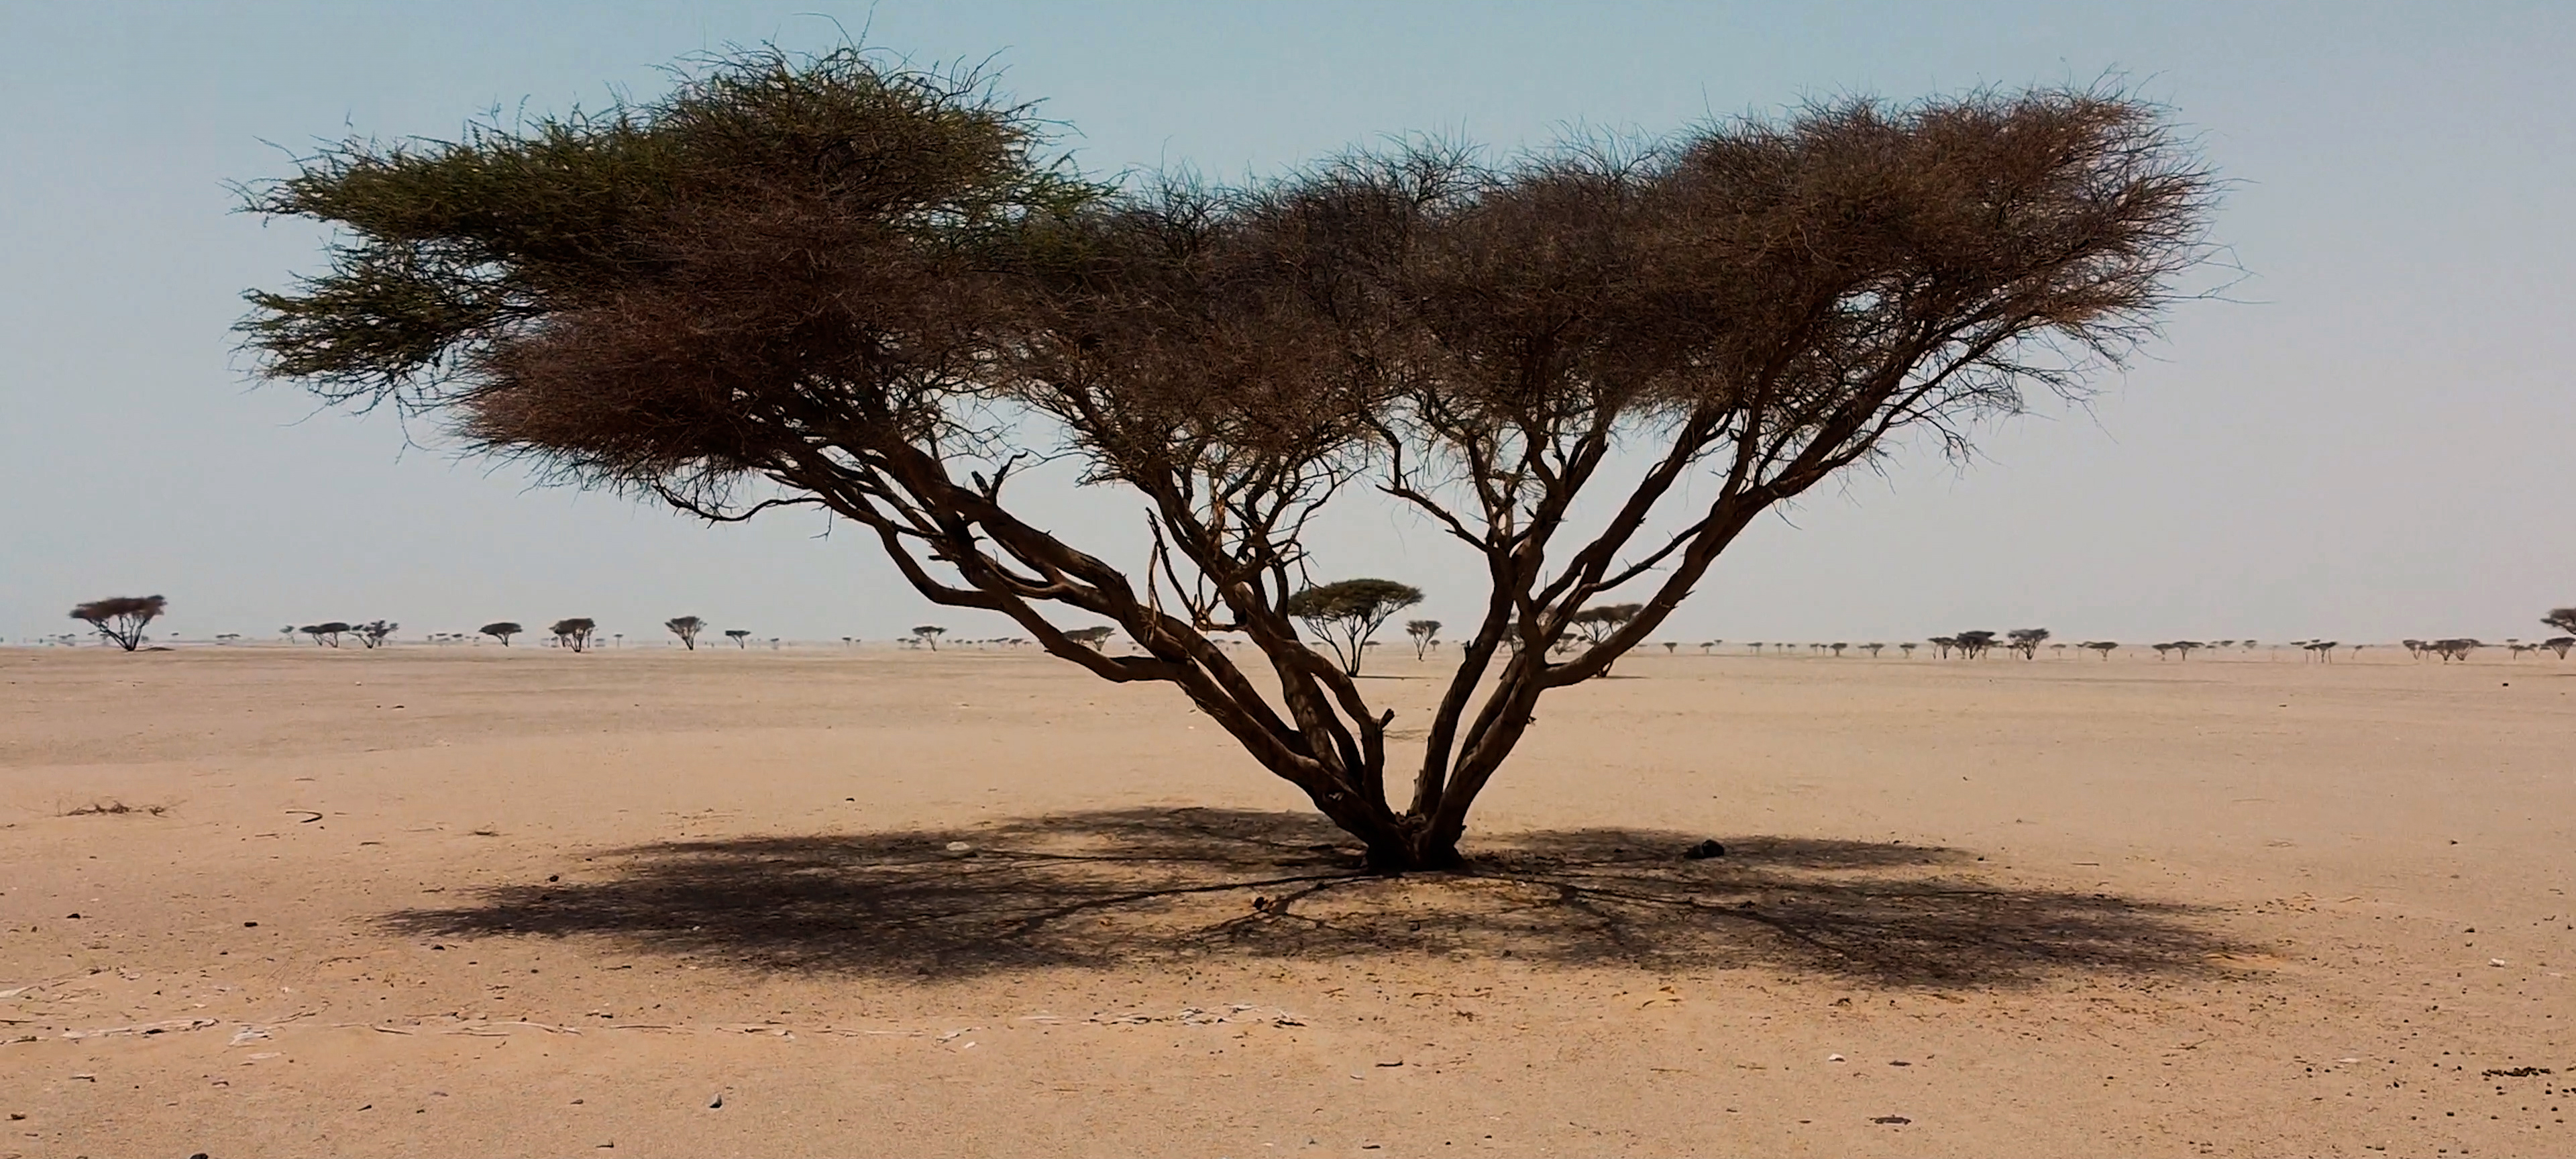 Acacia Trees: Strength, Resilience, and Timeless Beauty